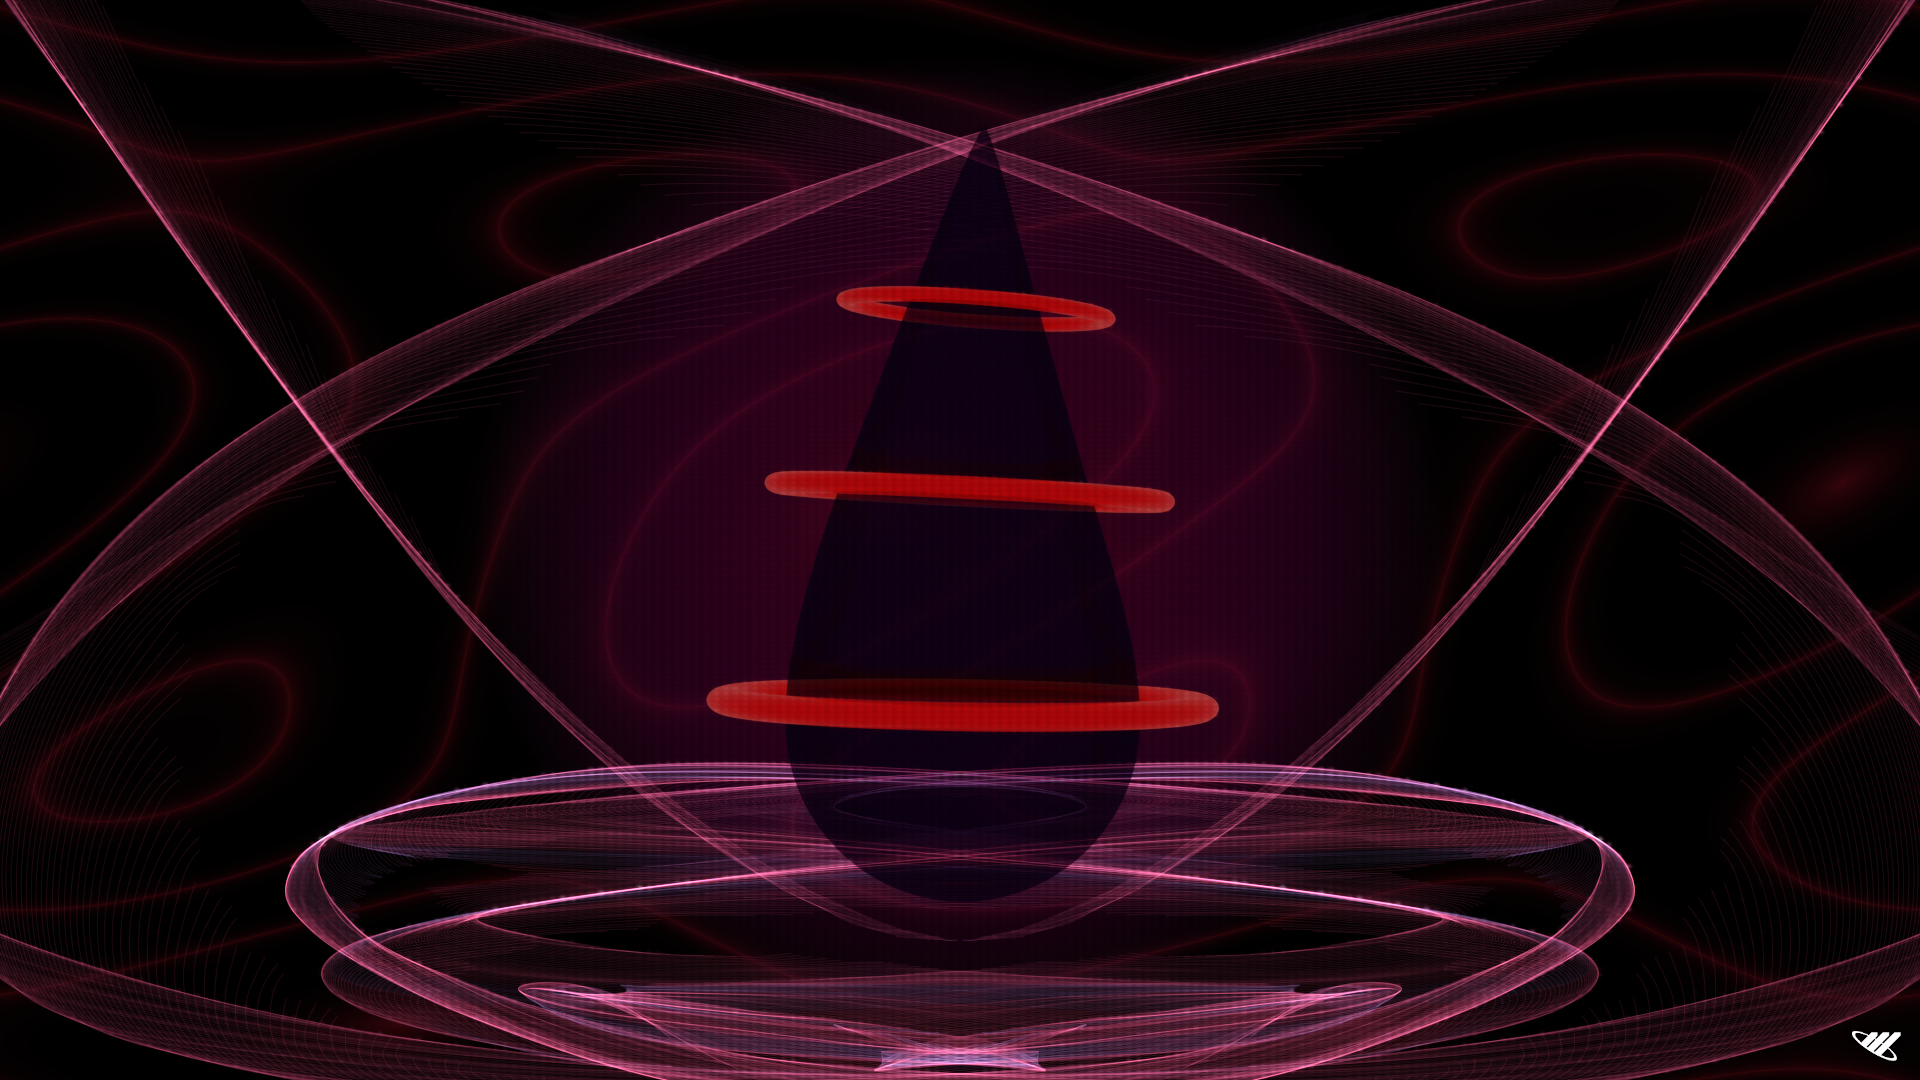 Black tear surrounded by red rings and pink-purple without text.